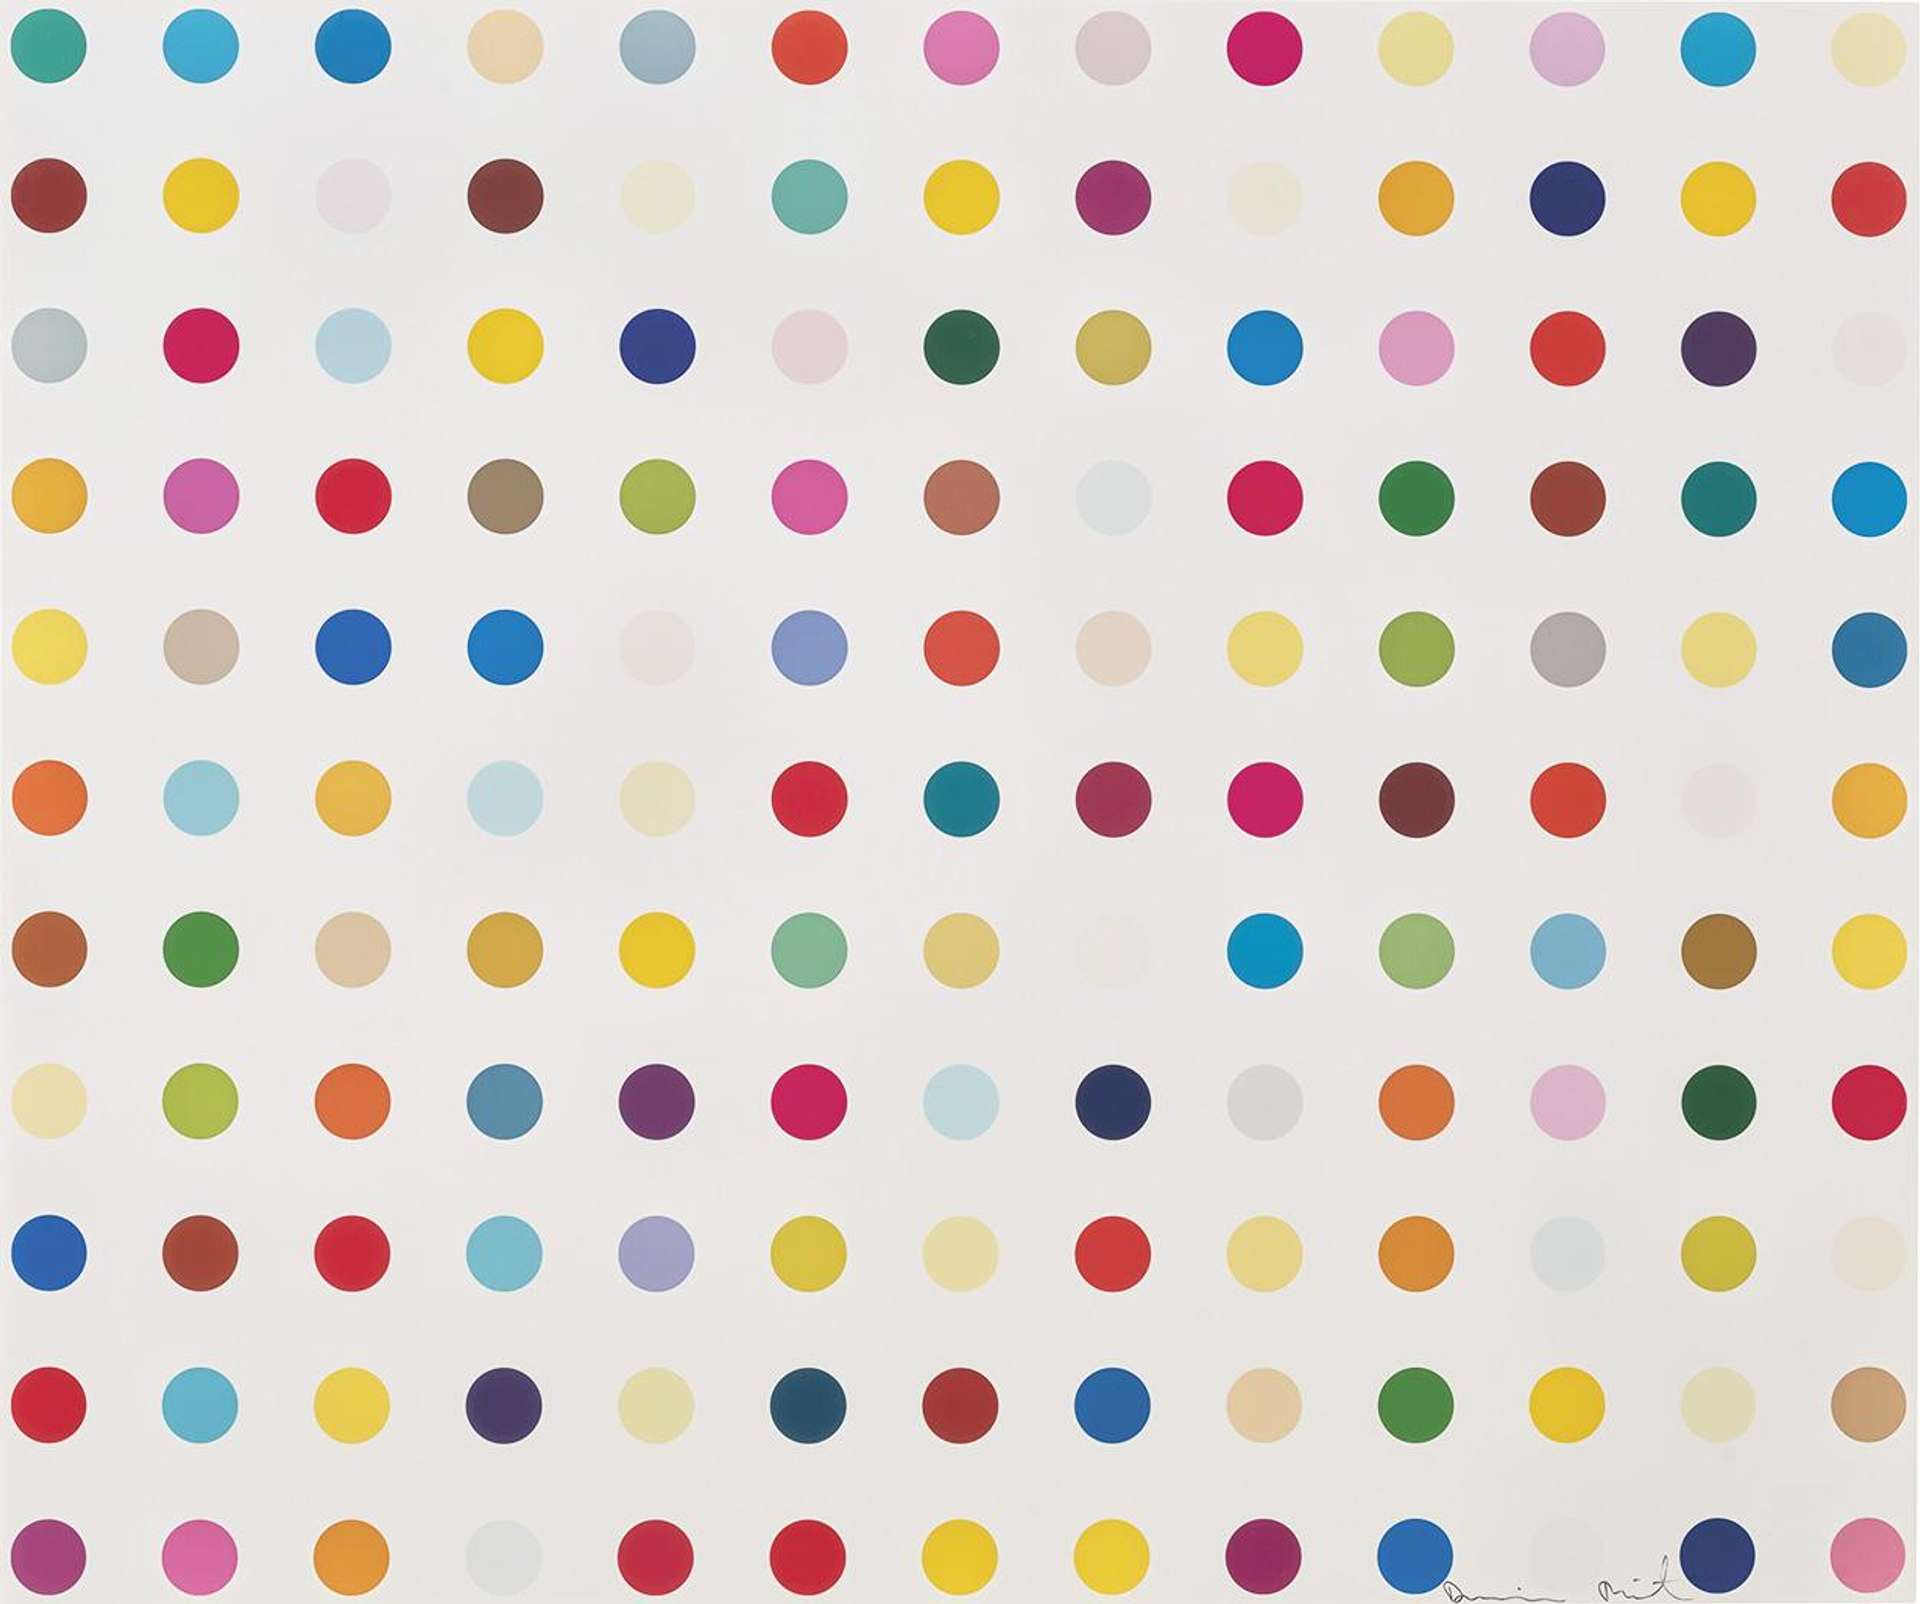 Lysergic Acid Diethylamide (LSD) is an etching by Damien Hirst from 2000 that shows many spots arranged methodically into rows, identical in size and shape.